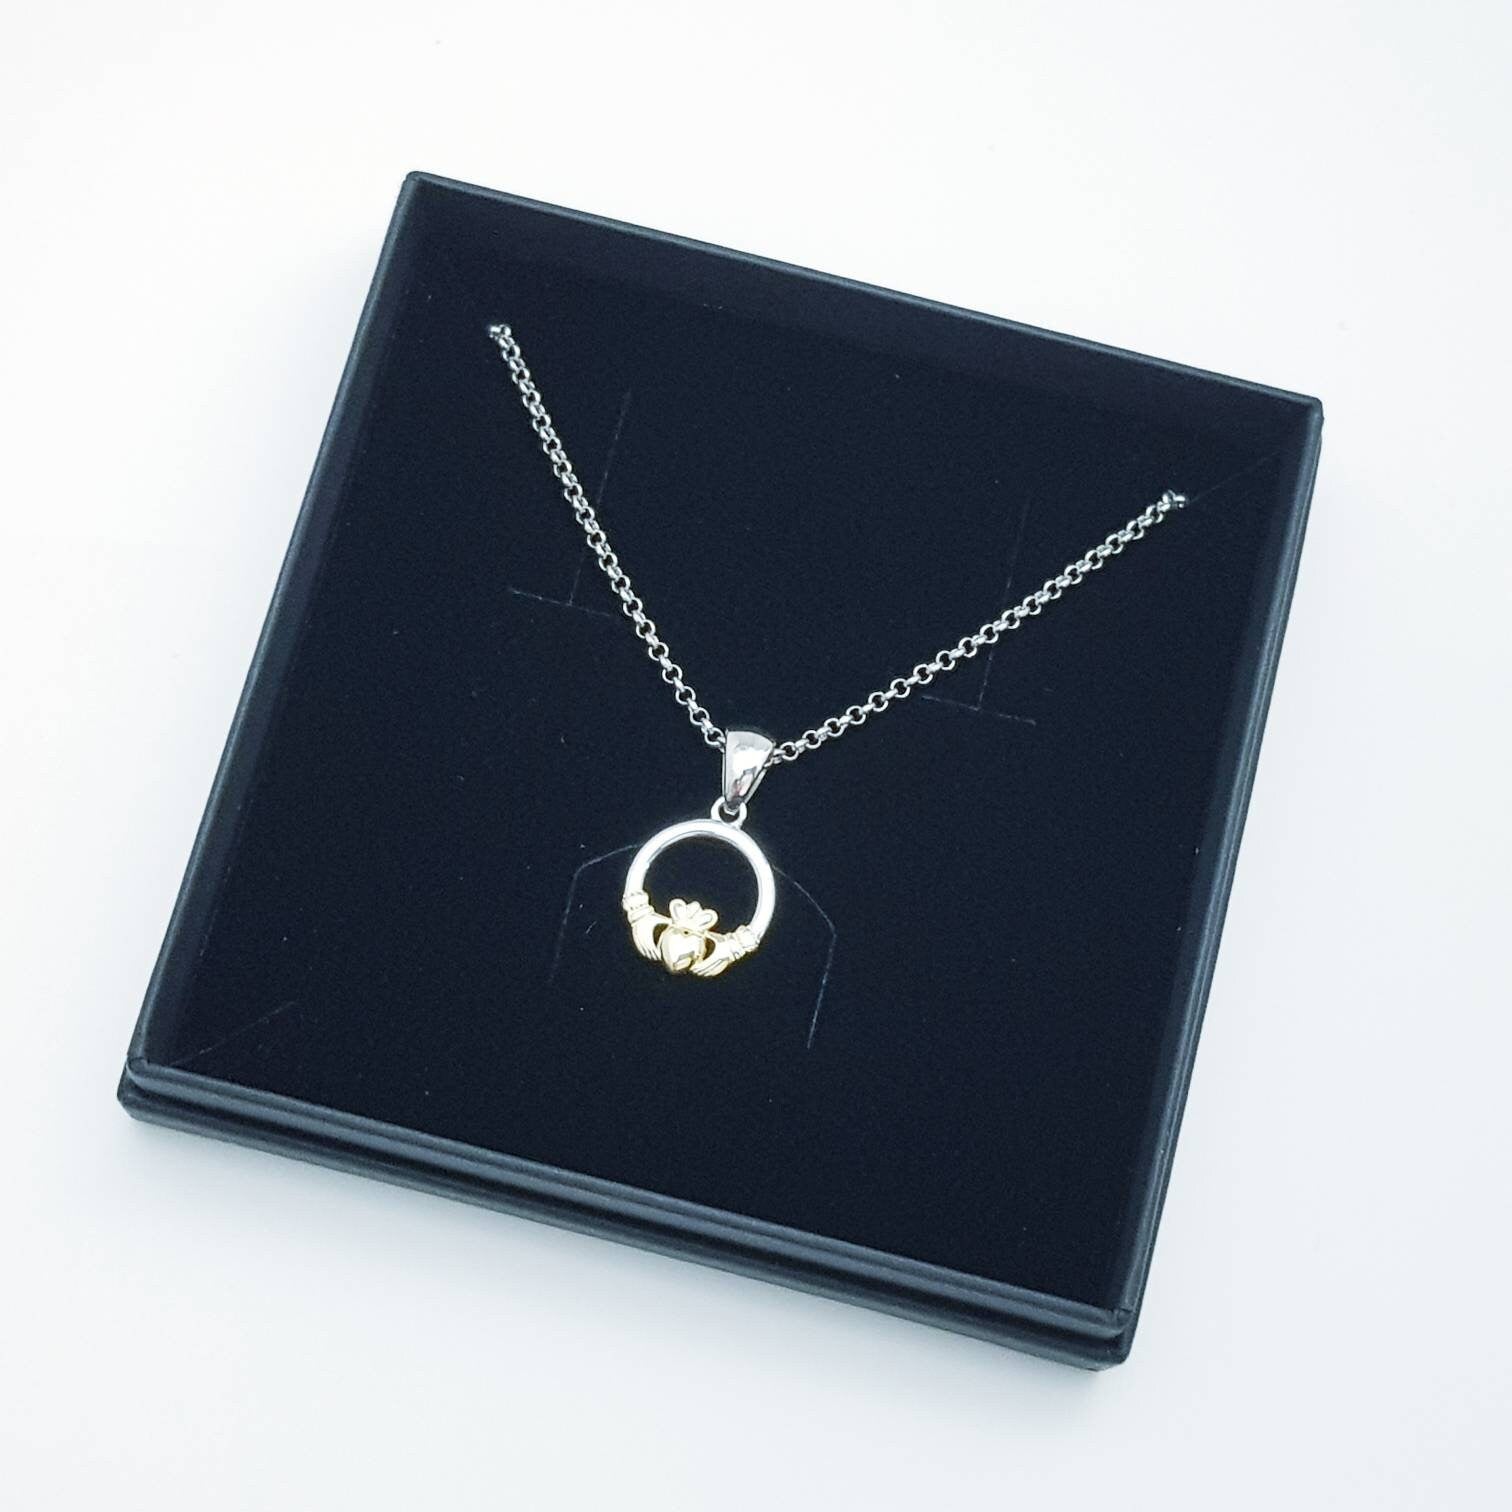 Dainty Claddagh pendant, Irish claddagh necklace from Galway, Gold and Silver claddagh necklace